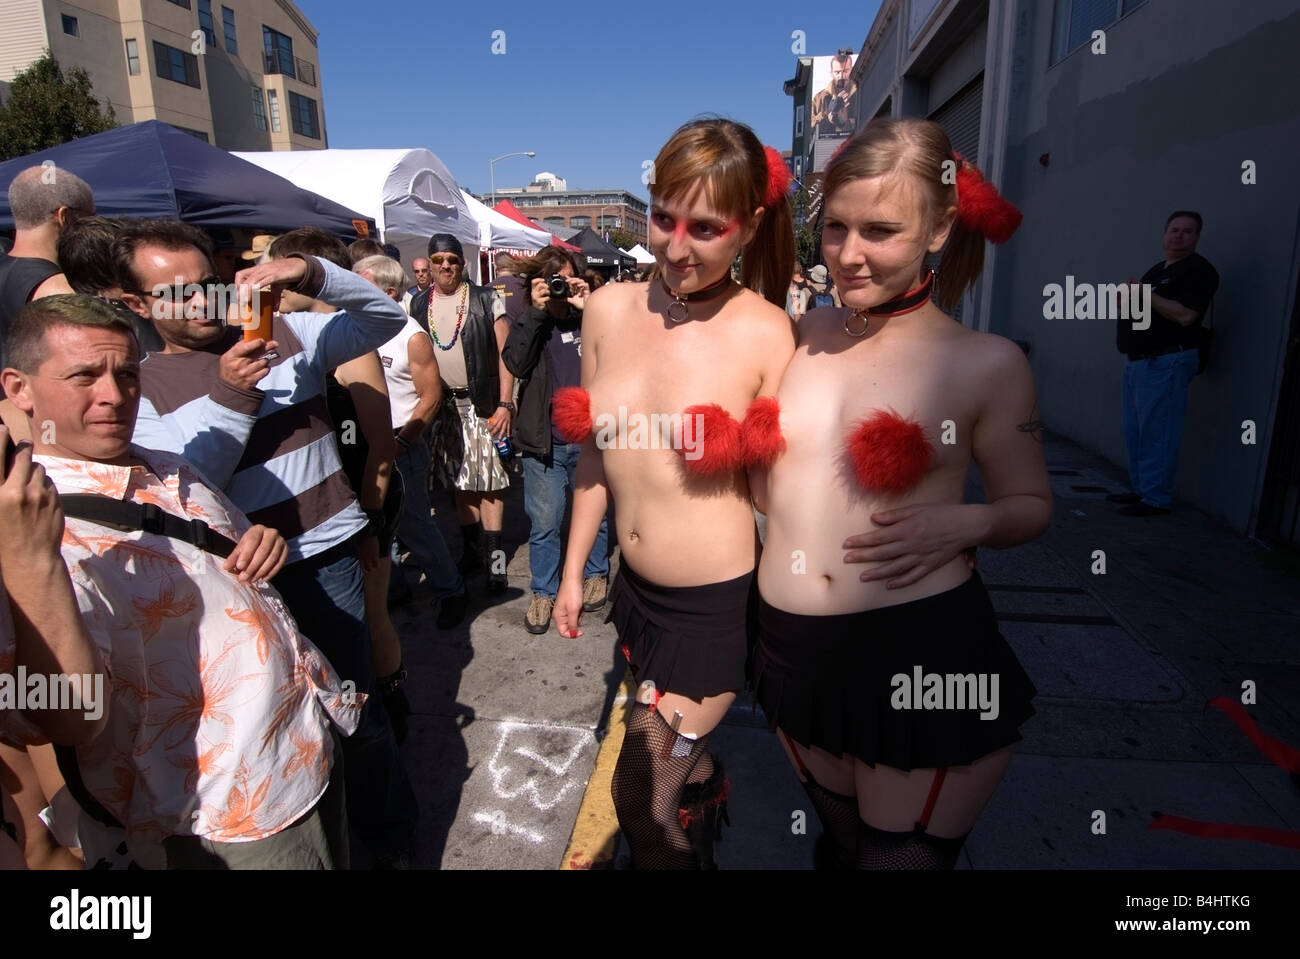 Two women at the 2008 Folsom Street Fair in San Francisco, CA. Stock Photo